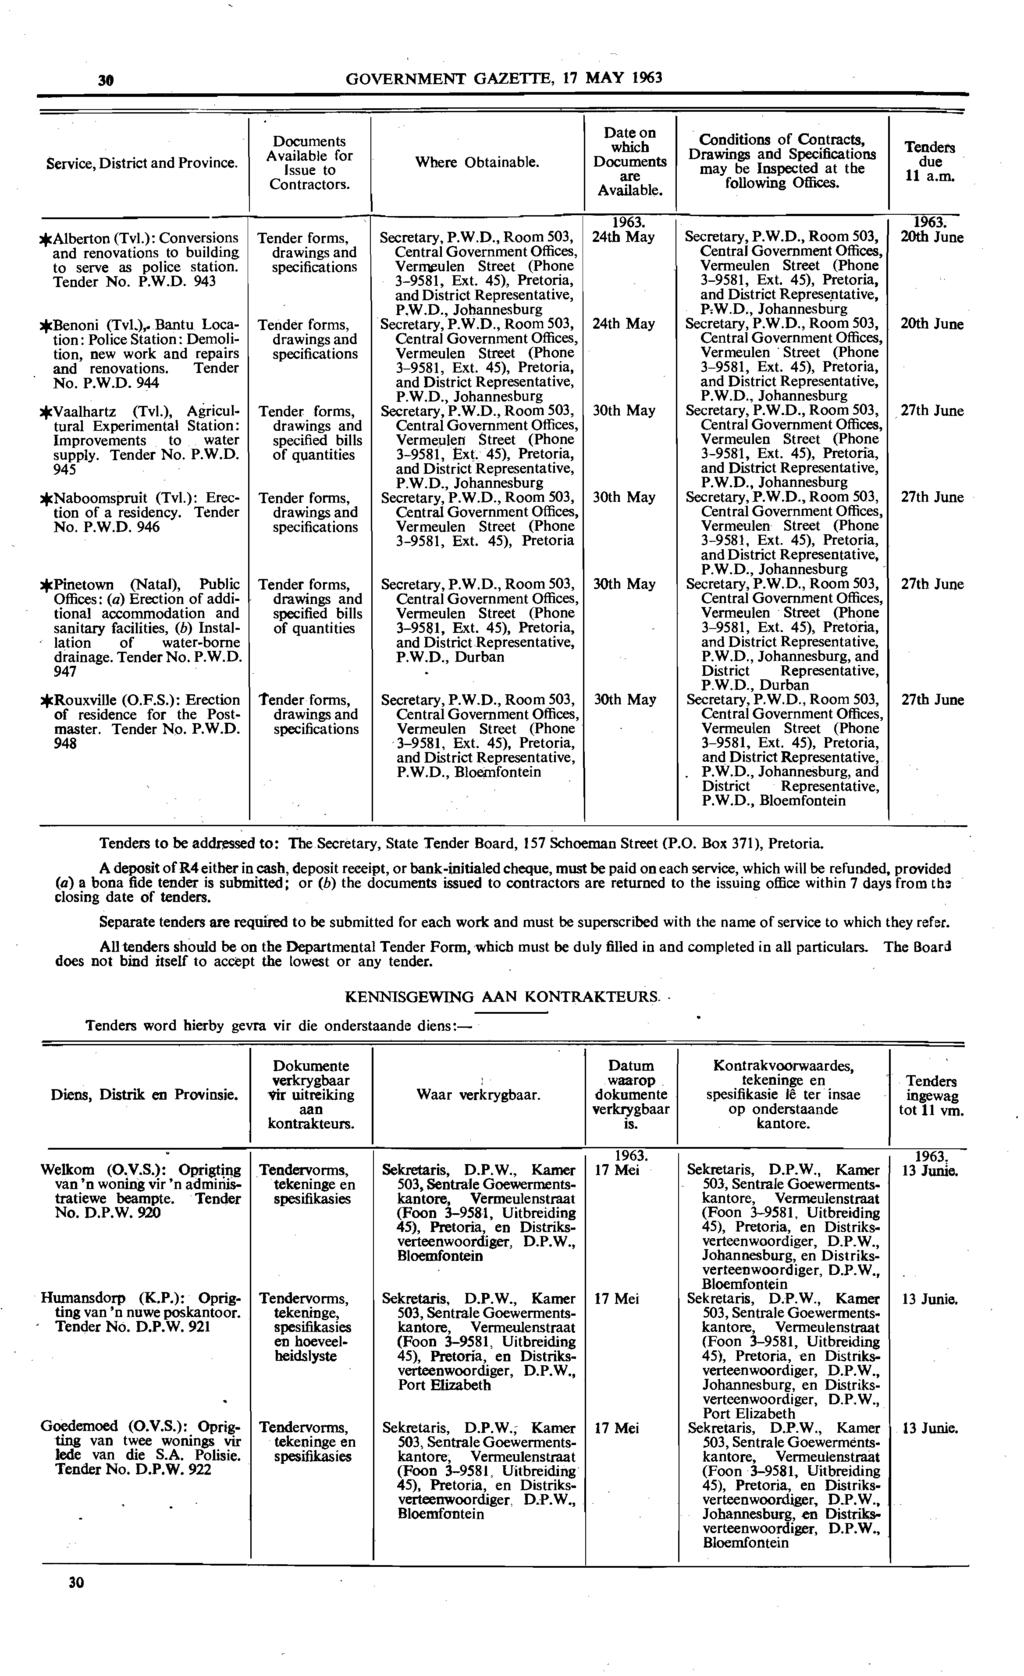 30 GOVERNMENT GAZEITE, 17 MAY 1963 Service, District and Province. Documents Available for Issue to Contractors. Where Obtainable. Date on which Documents are Available.